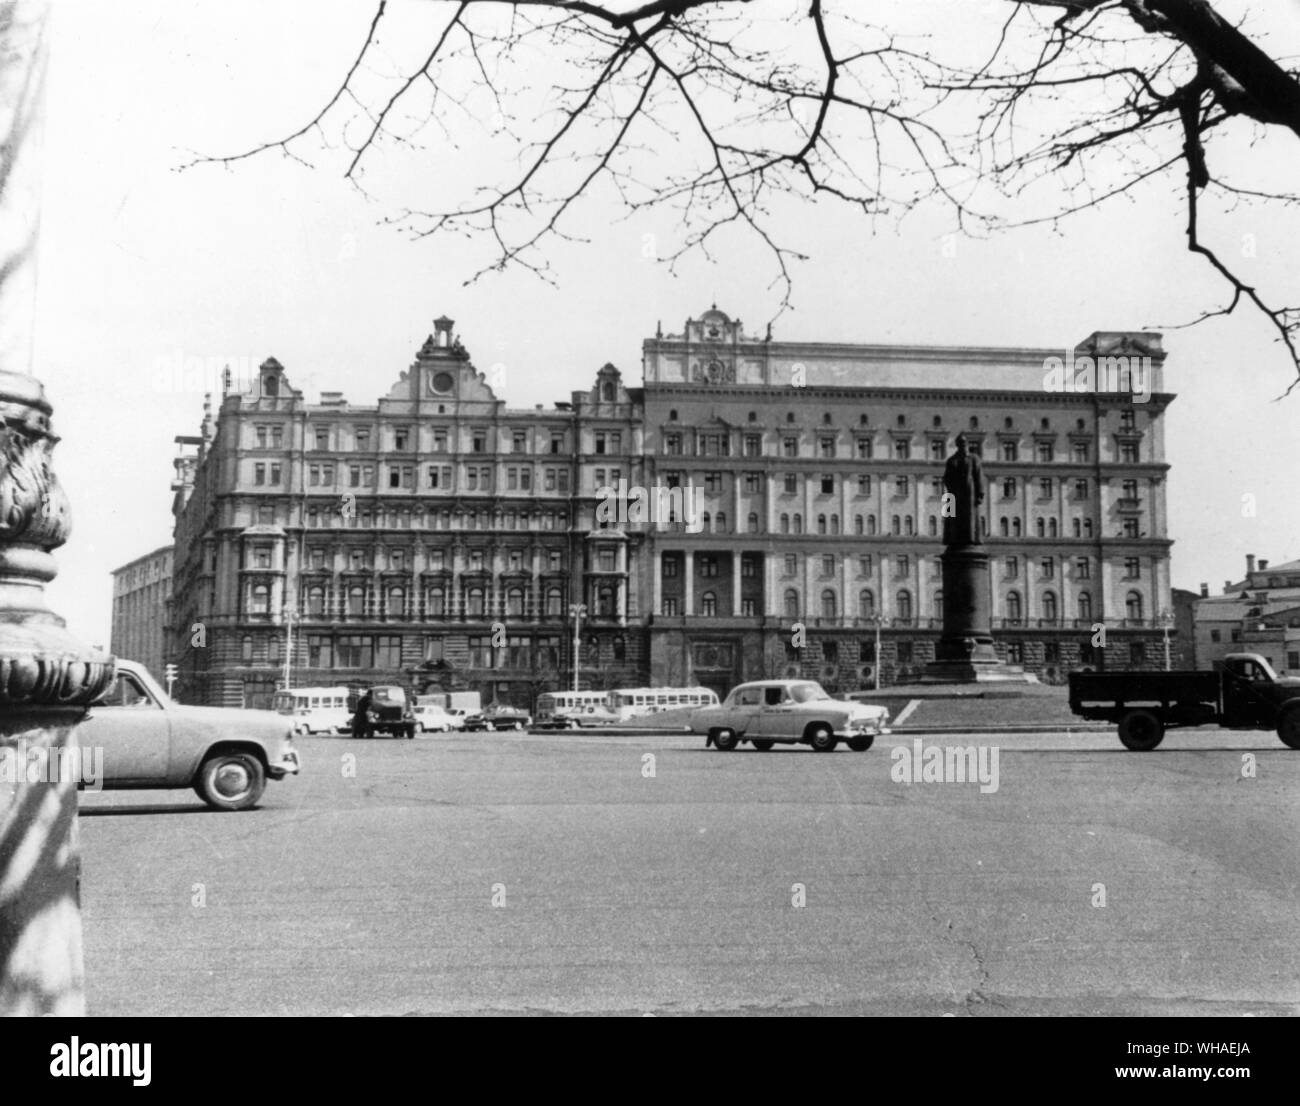 The headquarters of the KGB in Dzerzhinsky Square Moscow. The infamous Lubyanka prison, symbolic of Stalin's regime of terror, is at the back of the building. In the centre of the square is a statue of Feliks Dzerzinsky, the first head of the Russian secret service Stock Photo